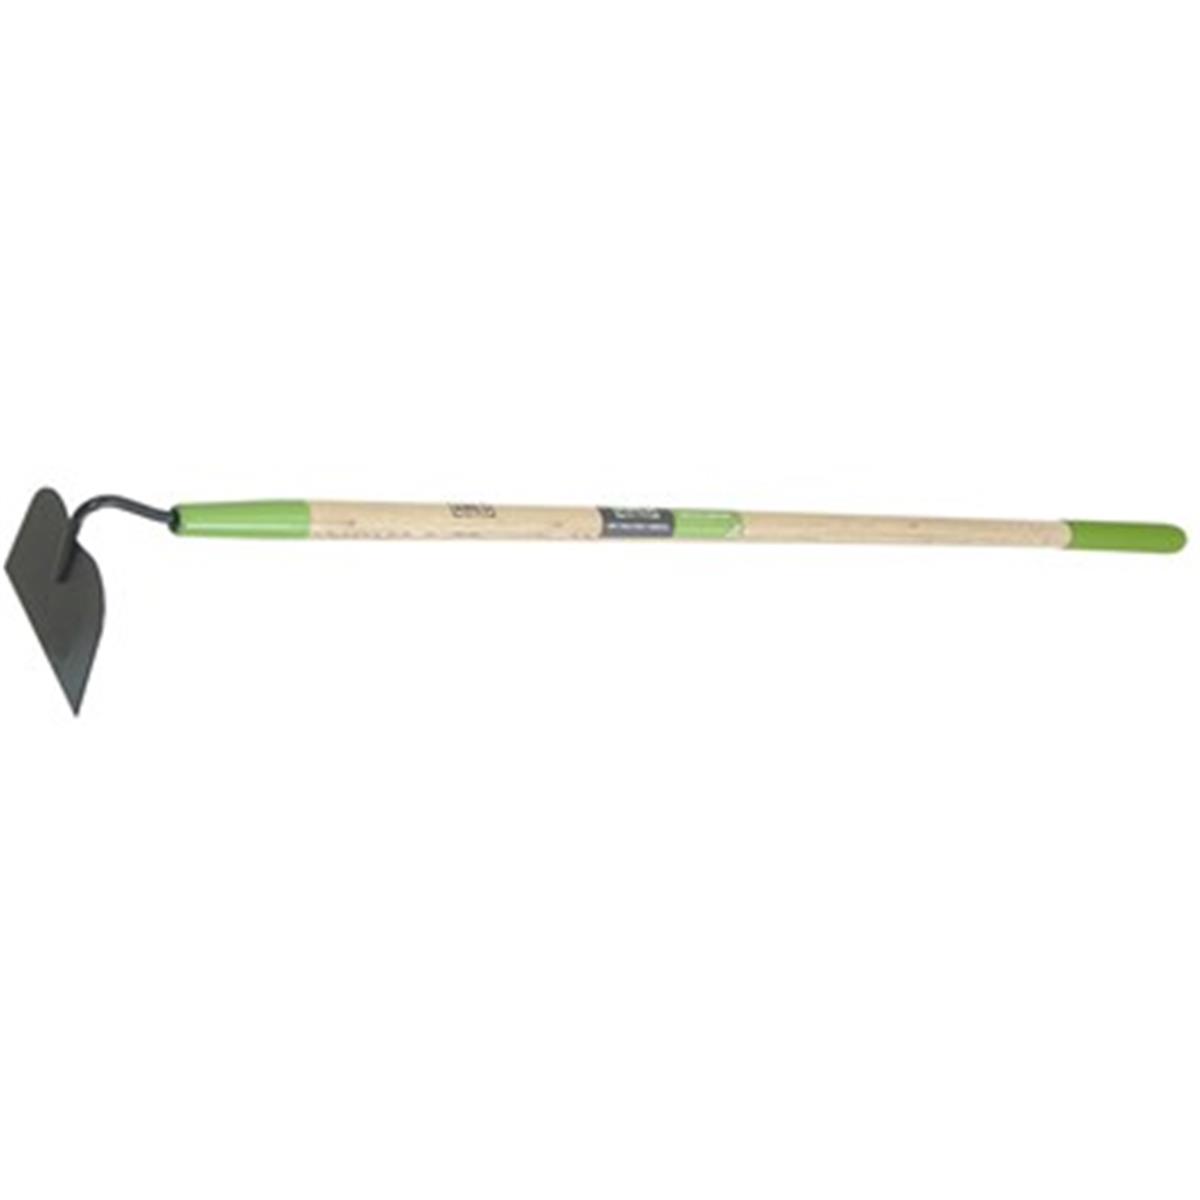 Picture of Ames AME2825700 Garden Hoe Ash Handle 15 Year